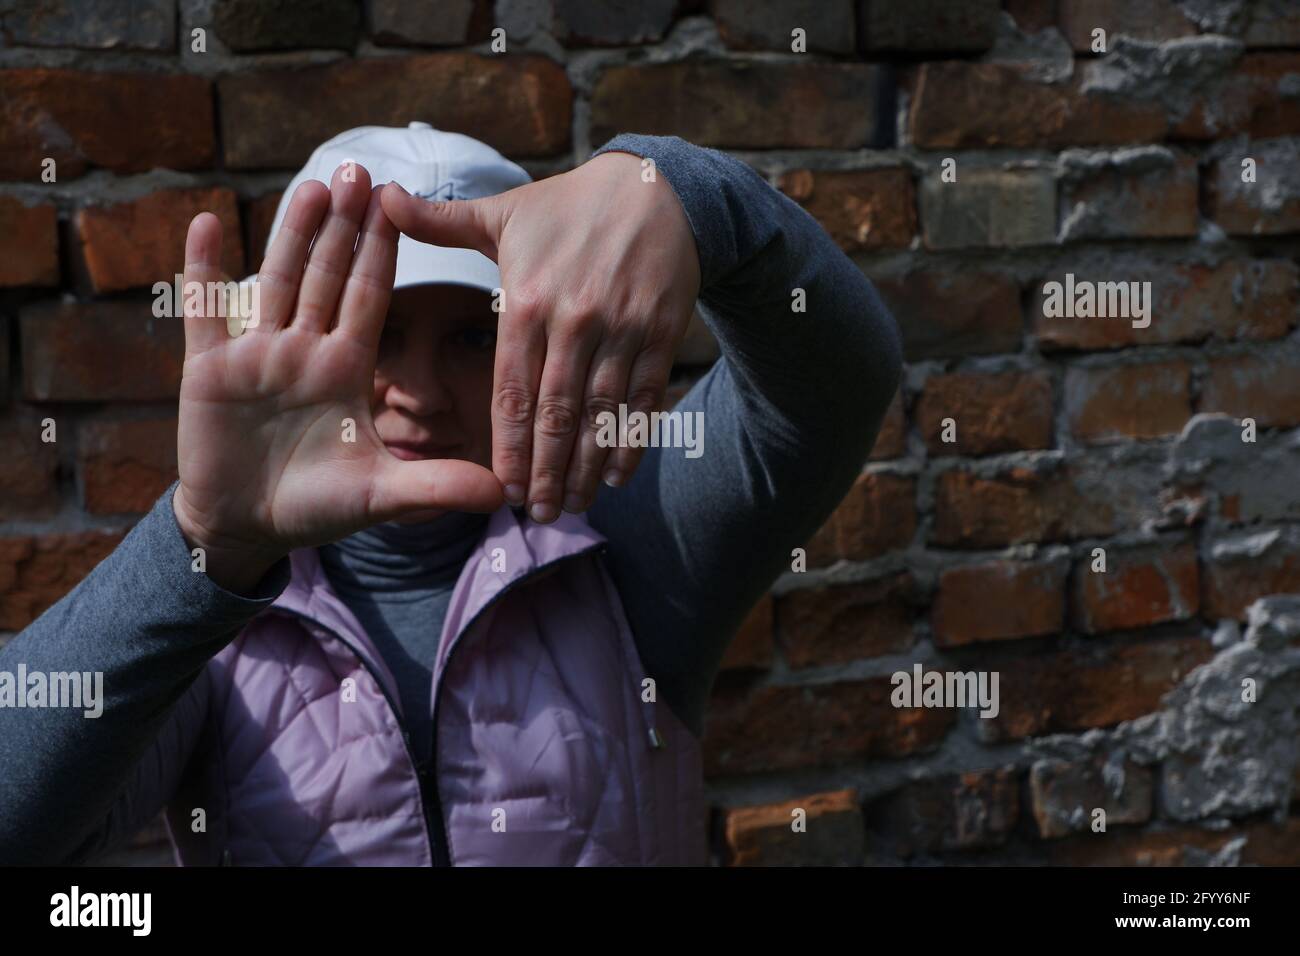 A girl near a brick wall with her hands imagines a camera. St. Veronica's Day Photographer's Day . Stock Photo